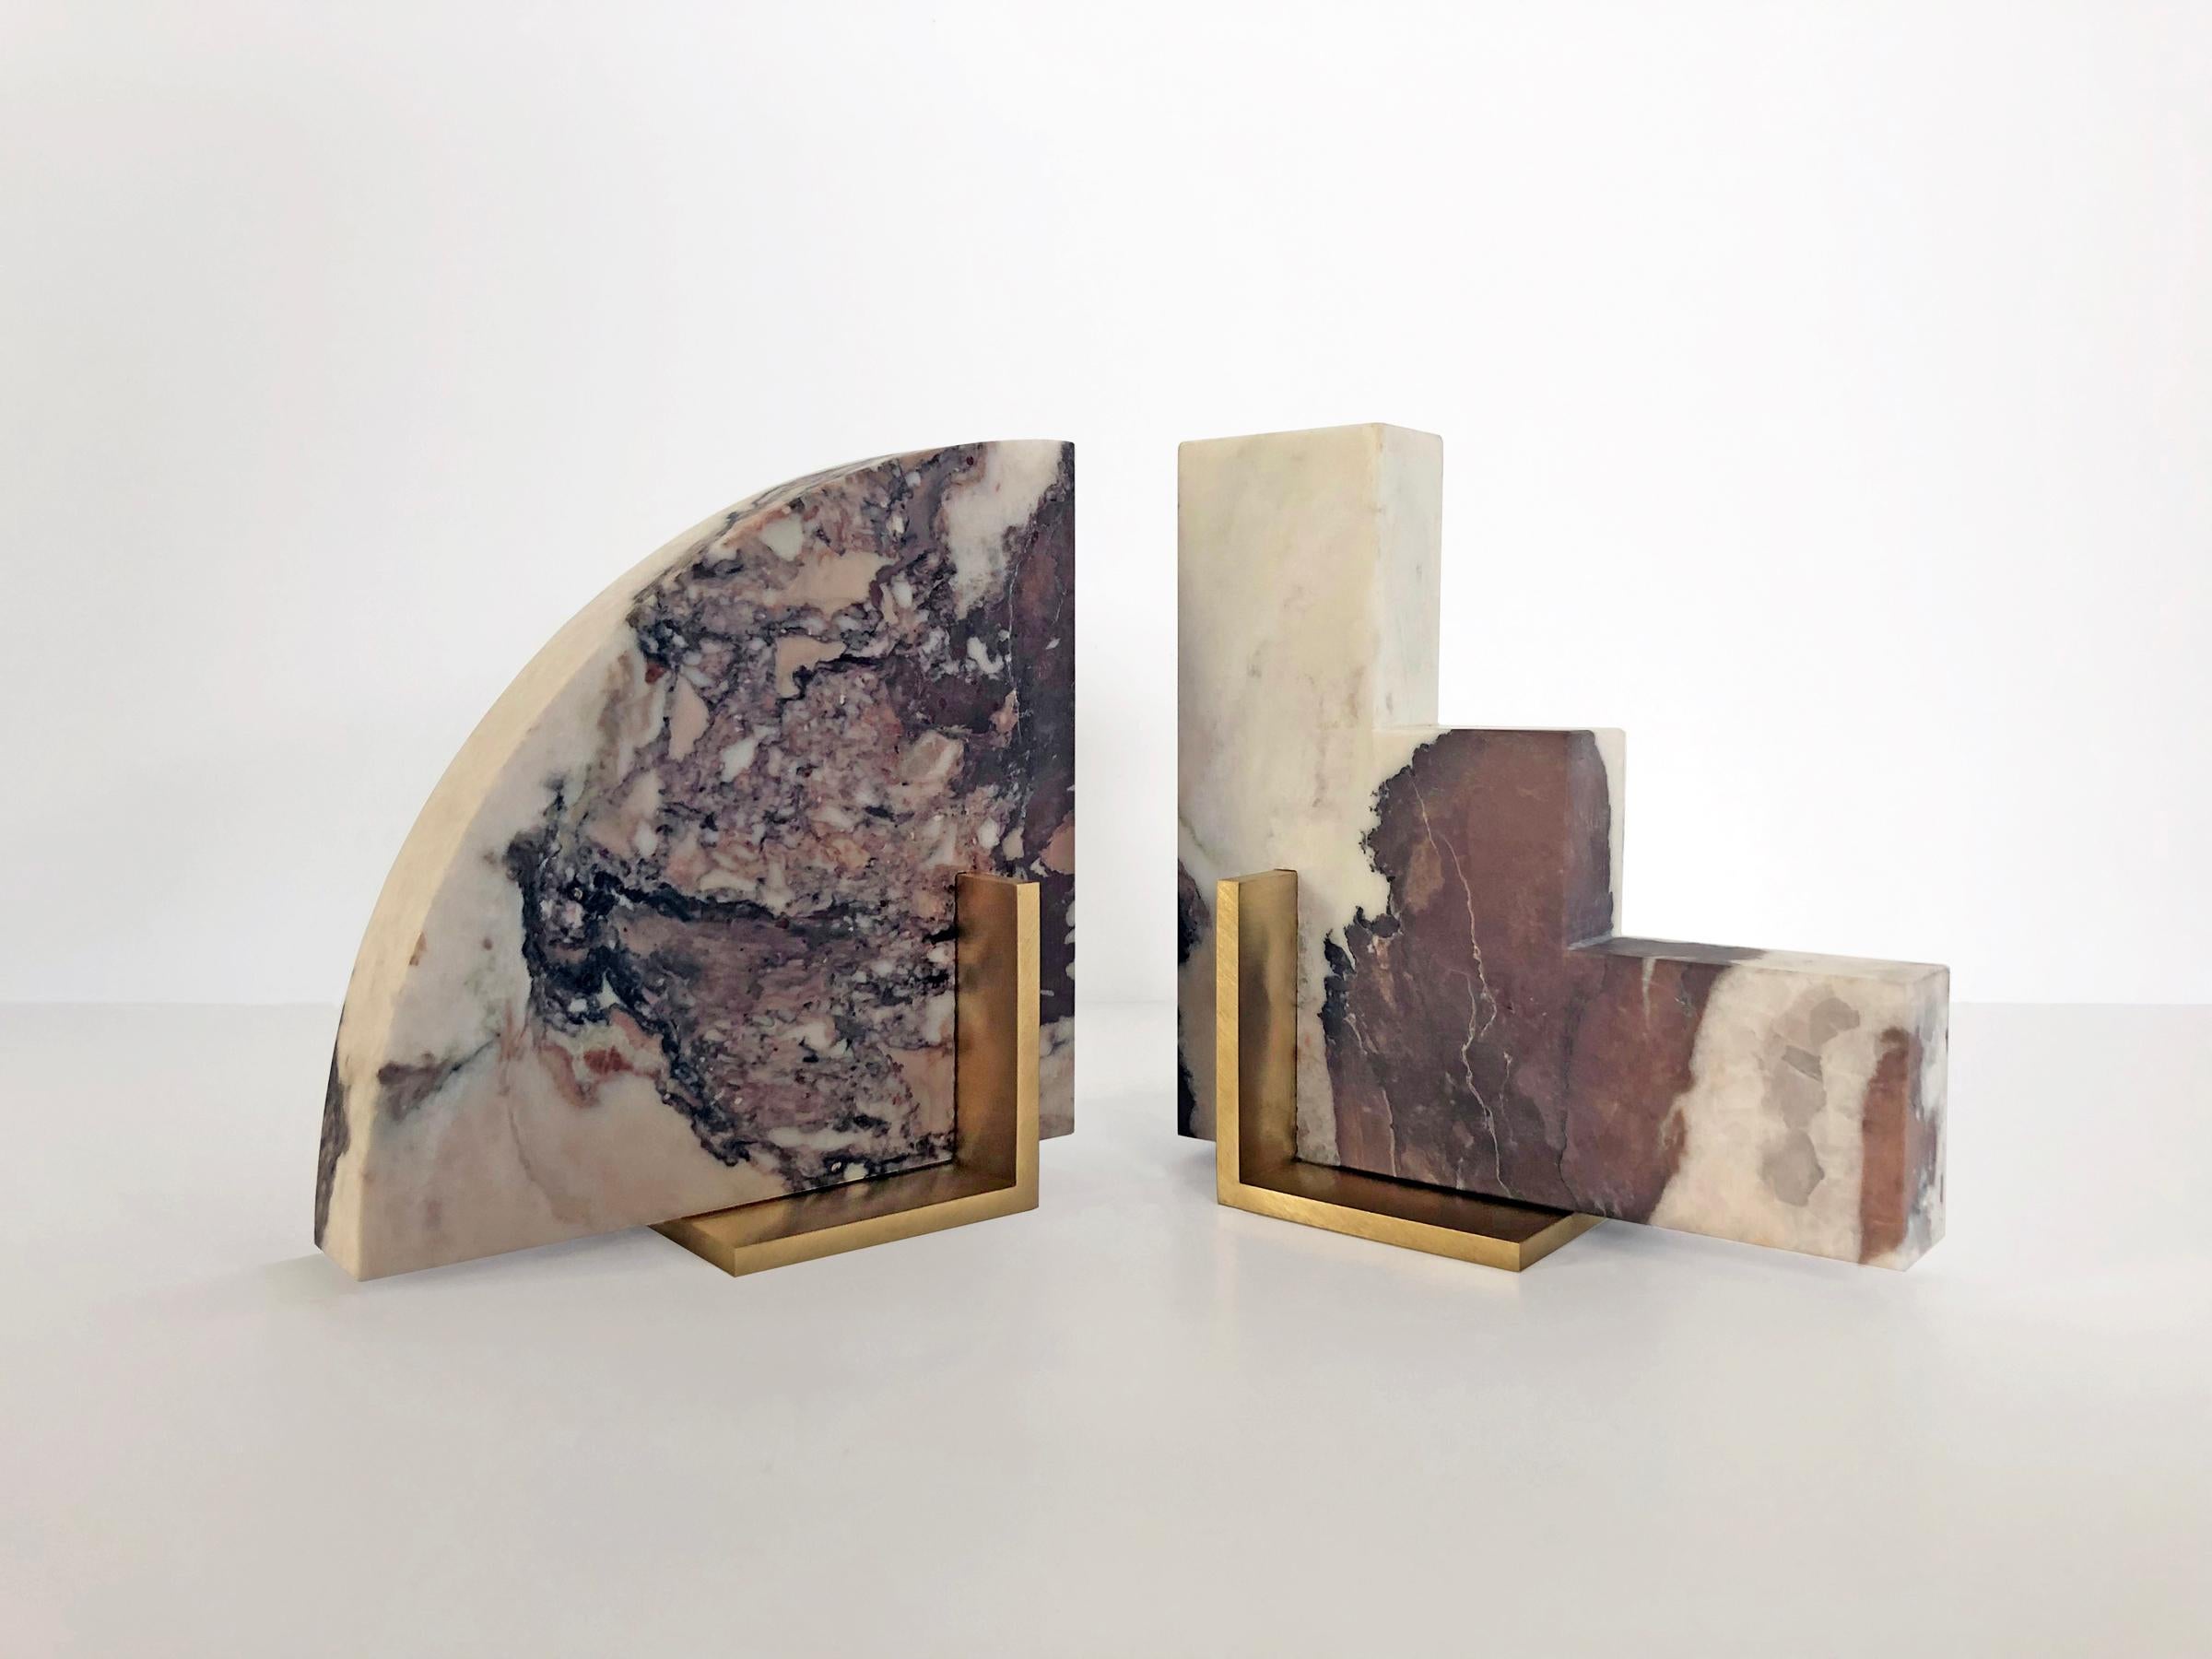 Meet Curvy and Steppy; the two individual bookends which as a pair are known as The Odd Couple Bookends.
Here shown in a honed Calacatta Viola marble with a brushed brass base.
The marble is cut into two geometric shapes and balanced over a brass